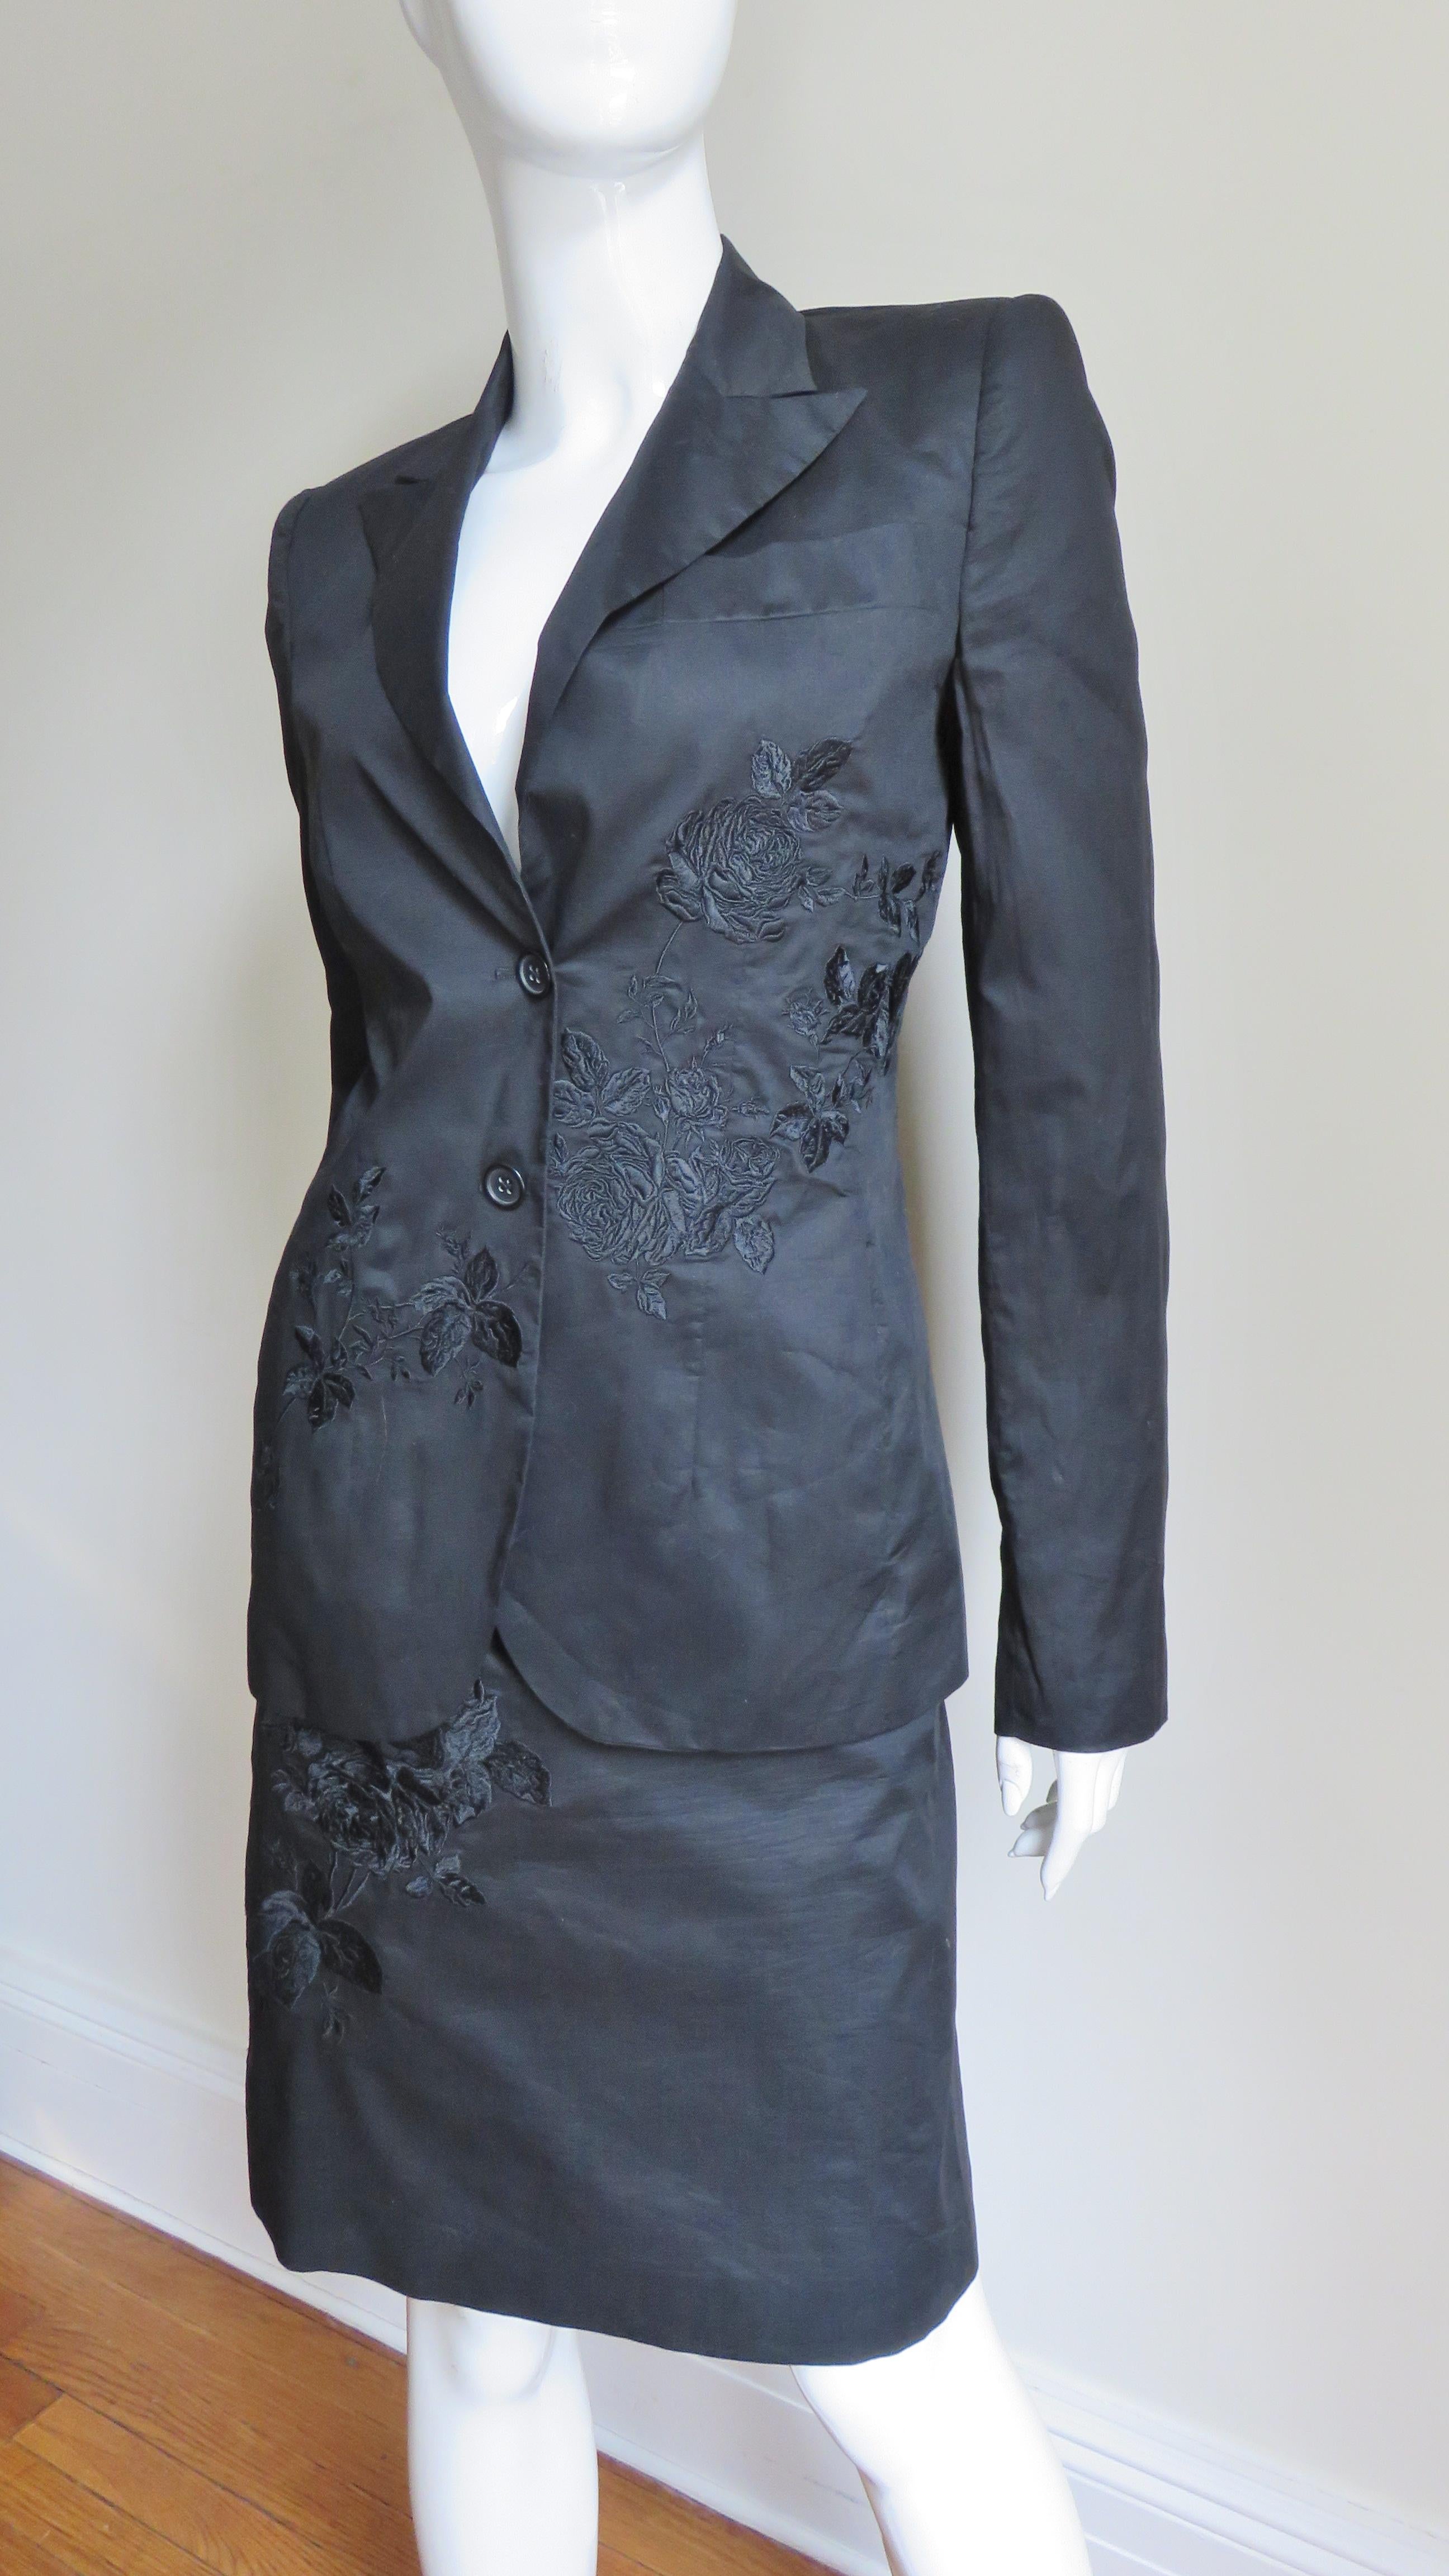 A fabulous suit from Alexander McQueen in a fine silk/linen in black and white.  The jacket has peak lapels, a breast pocket, small shoulder padding, side seam pockets and 2 button front closure. It has exceptional intricate large flower embroidery